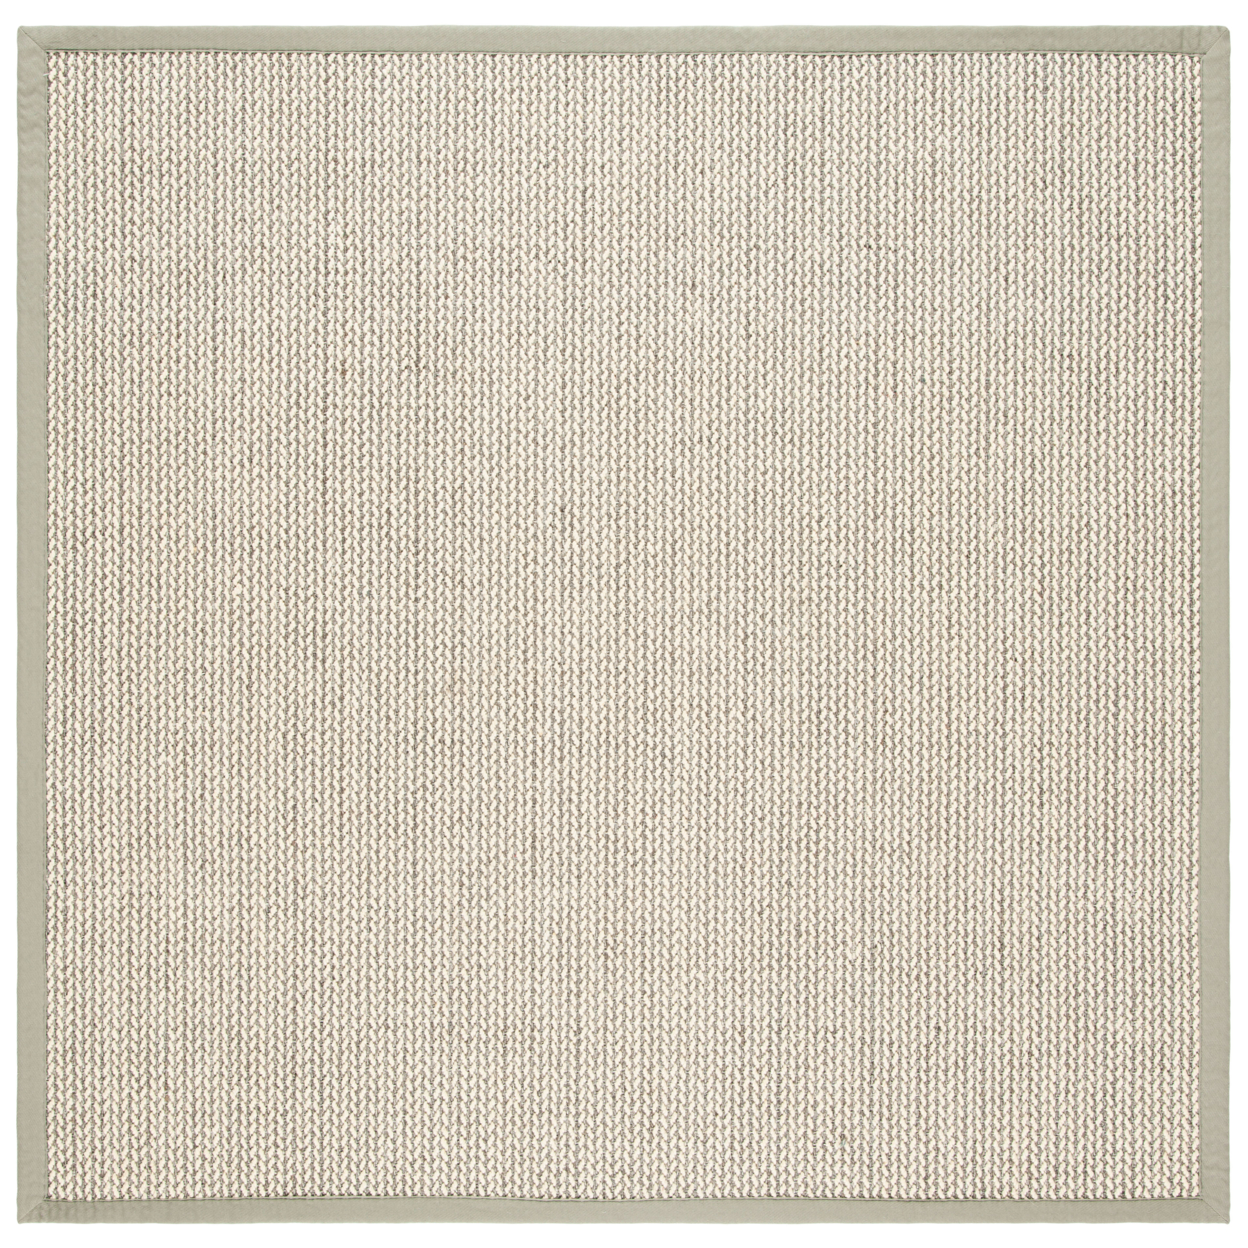 SAFAVIEH Natural Fiber Collection NF475A Grey Rug - 6' Square